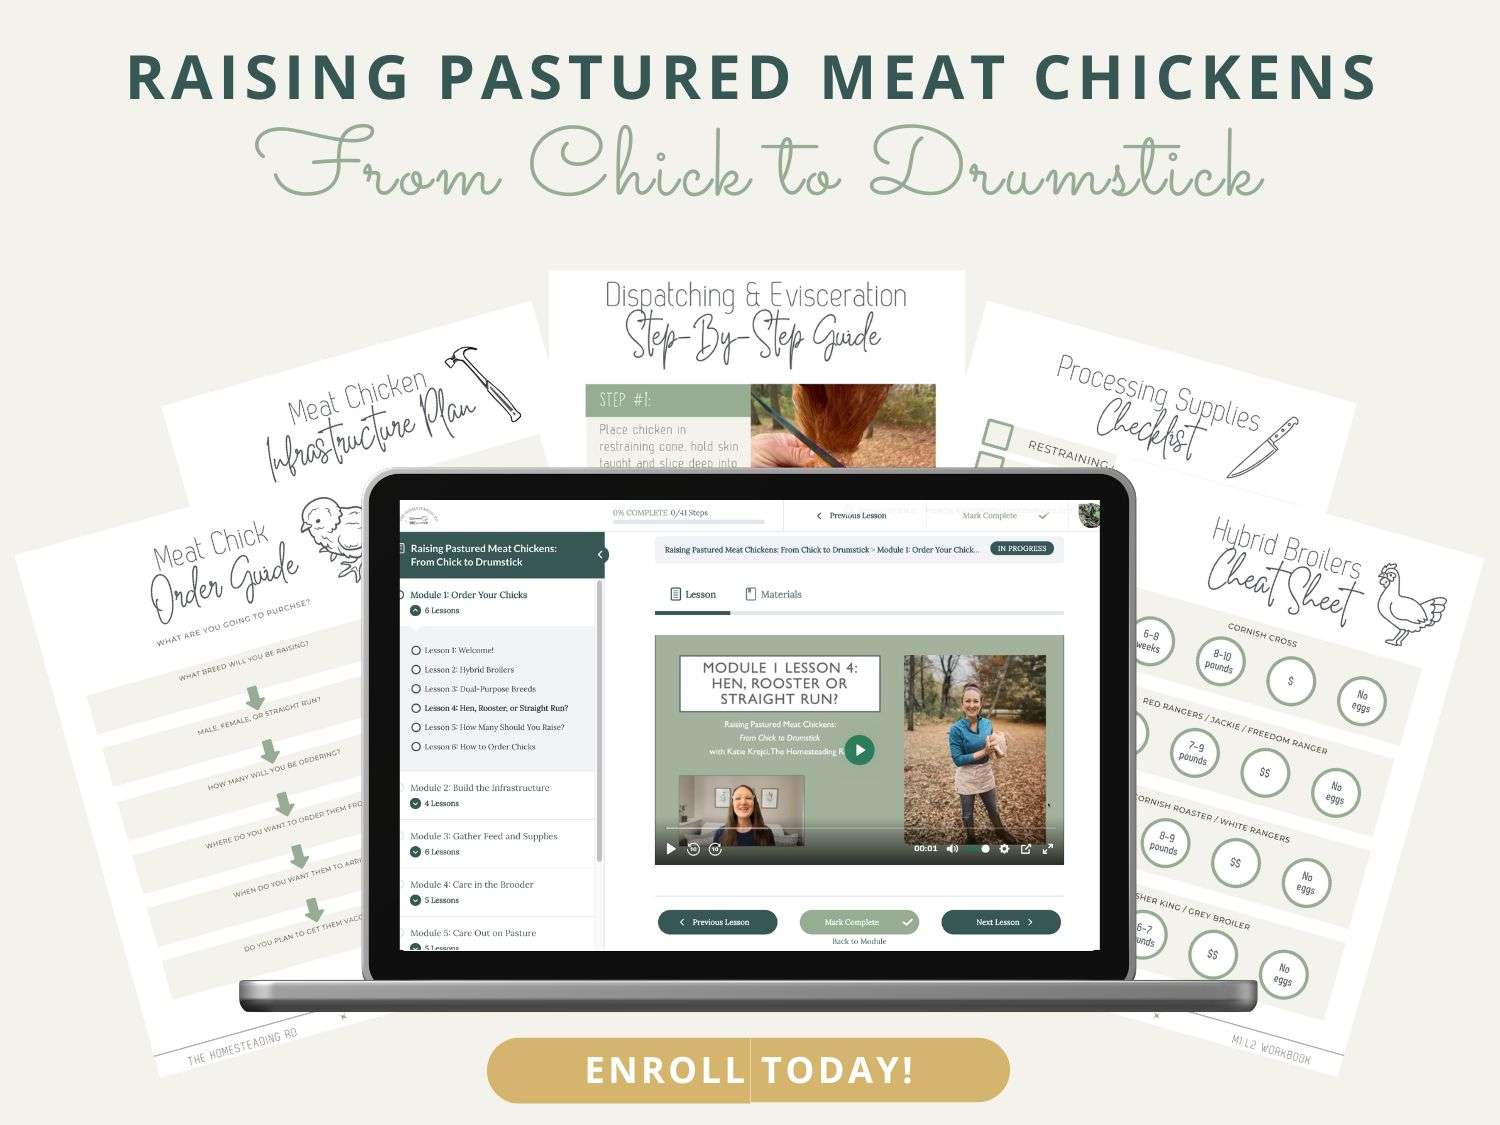 Promotion photo showing snapshots from Katie's course "how to raise pastured meat chickens"